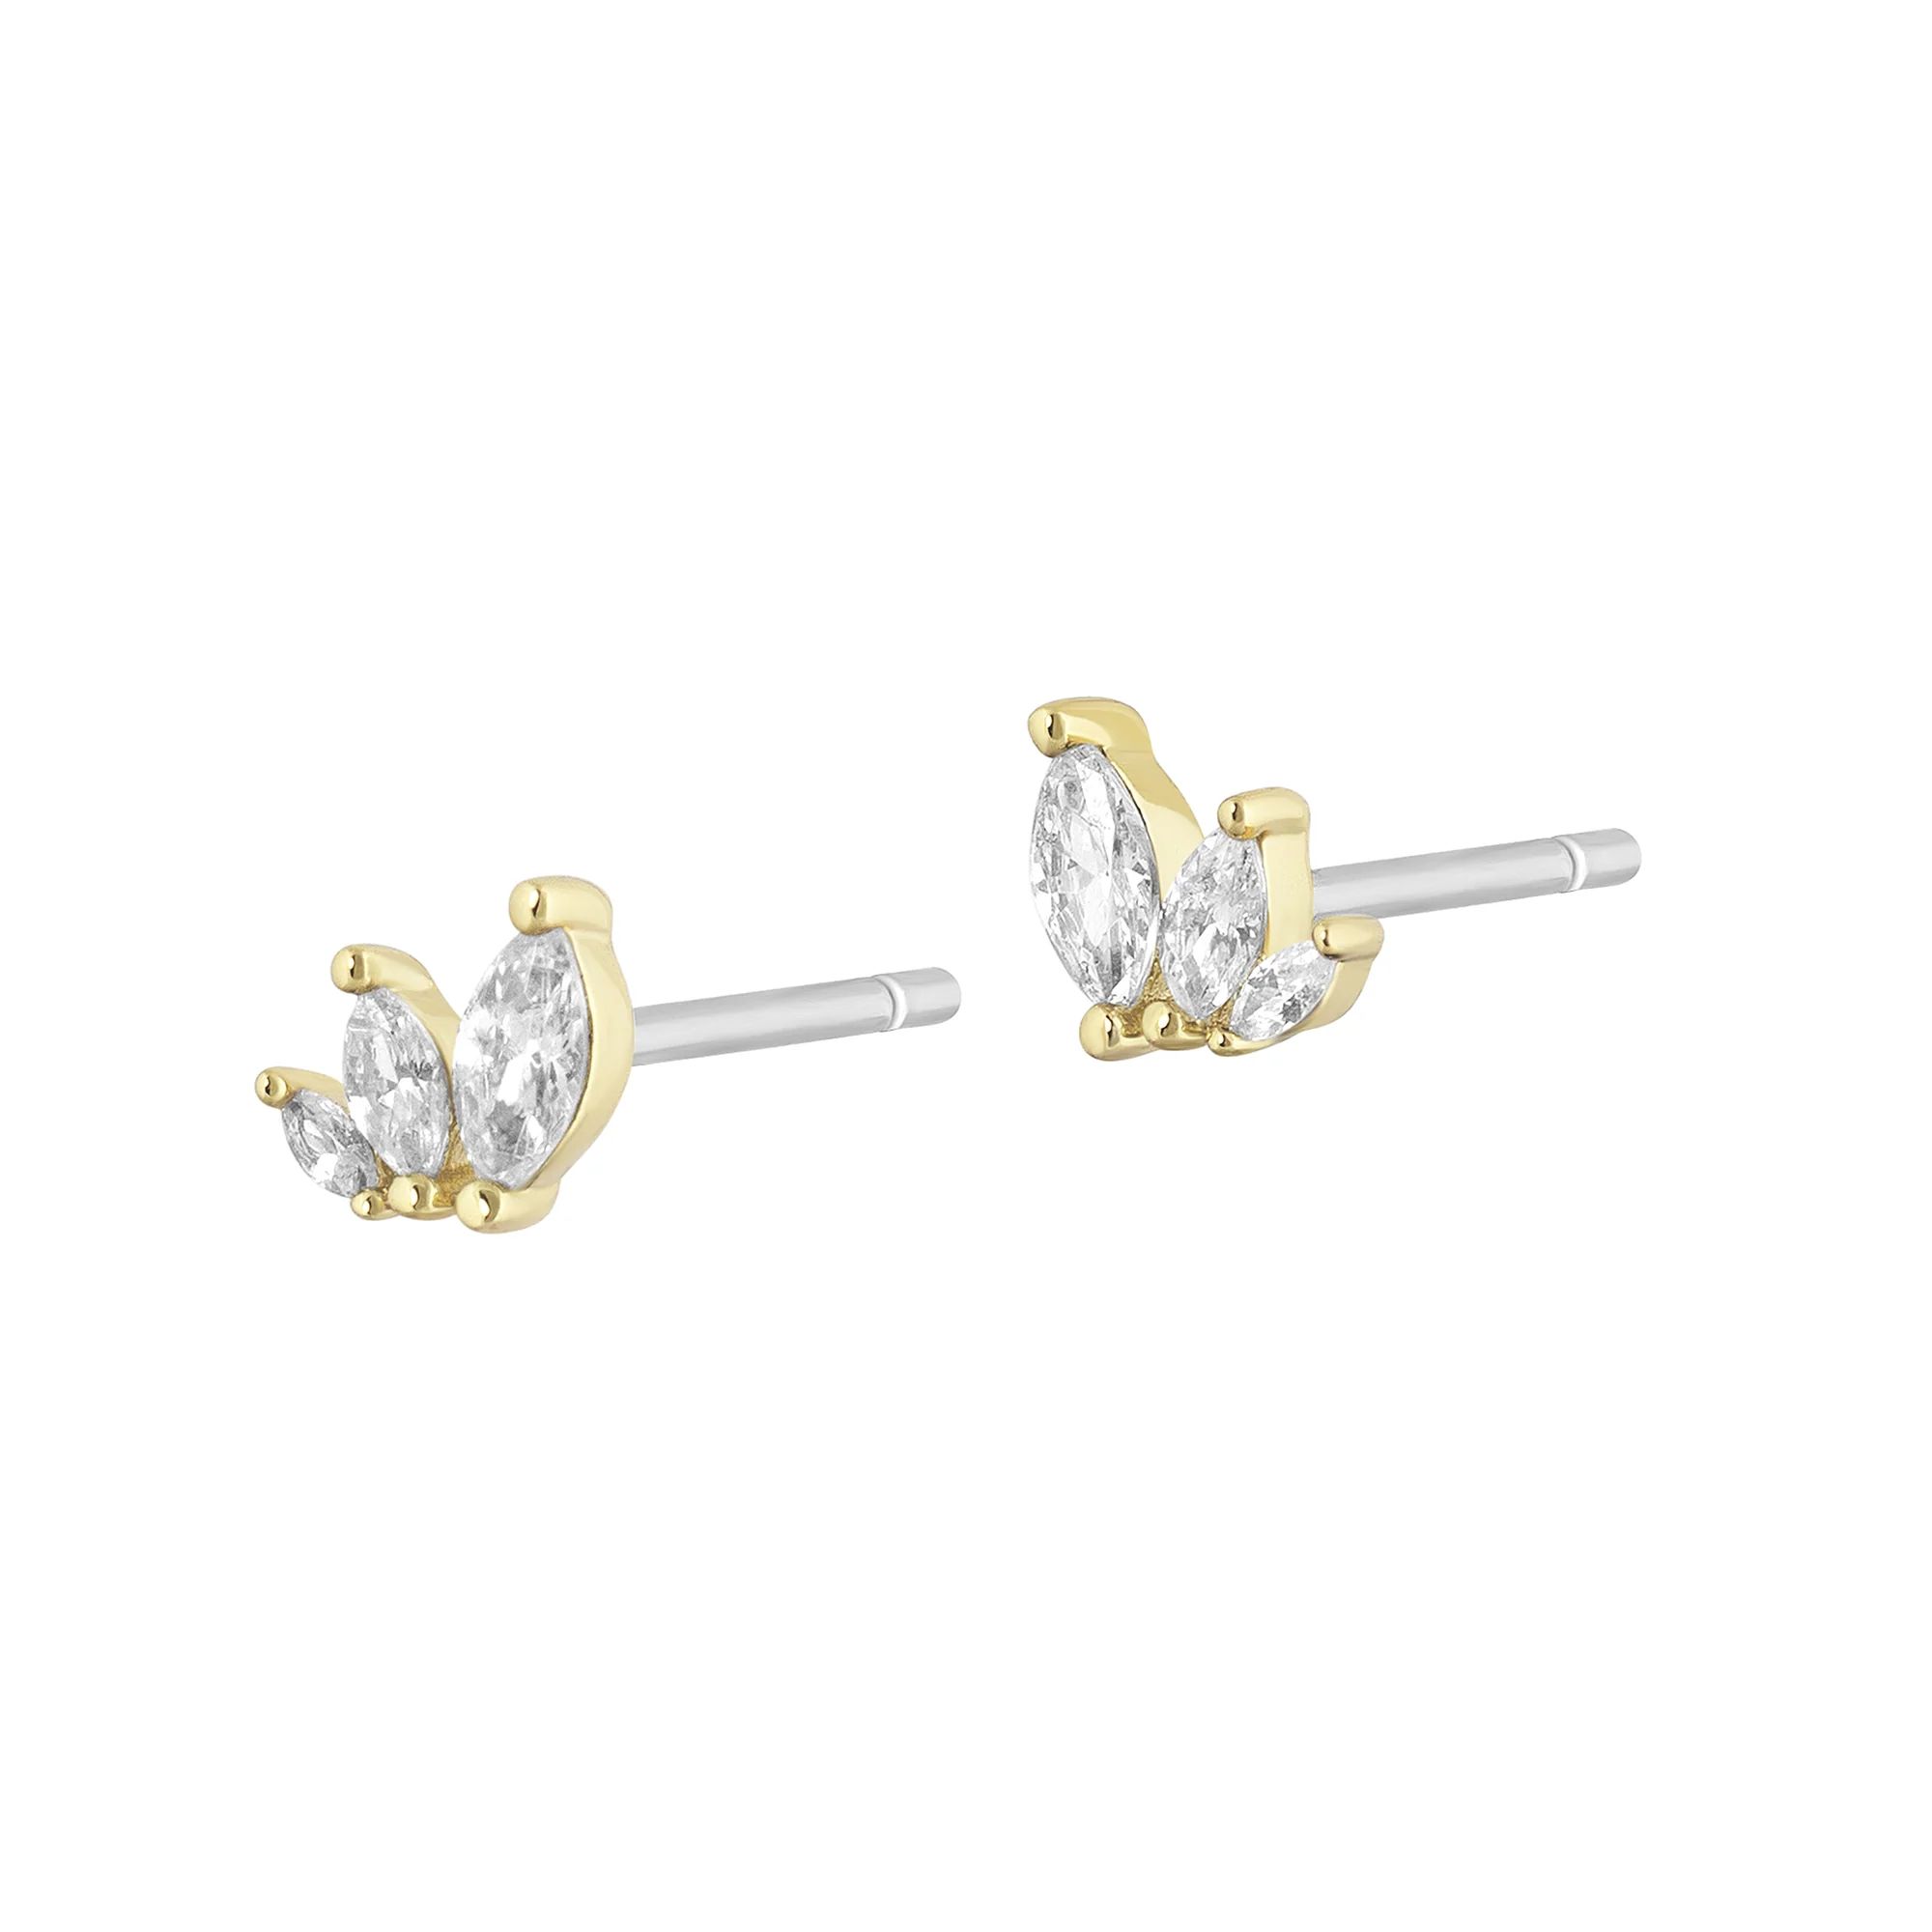 Marquee Studs | Electric Picks Jewelry